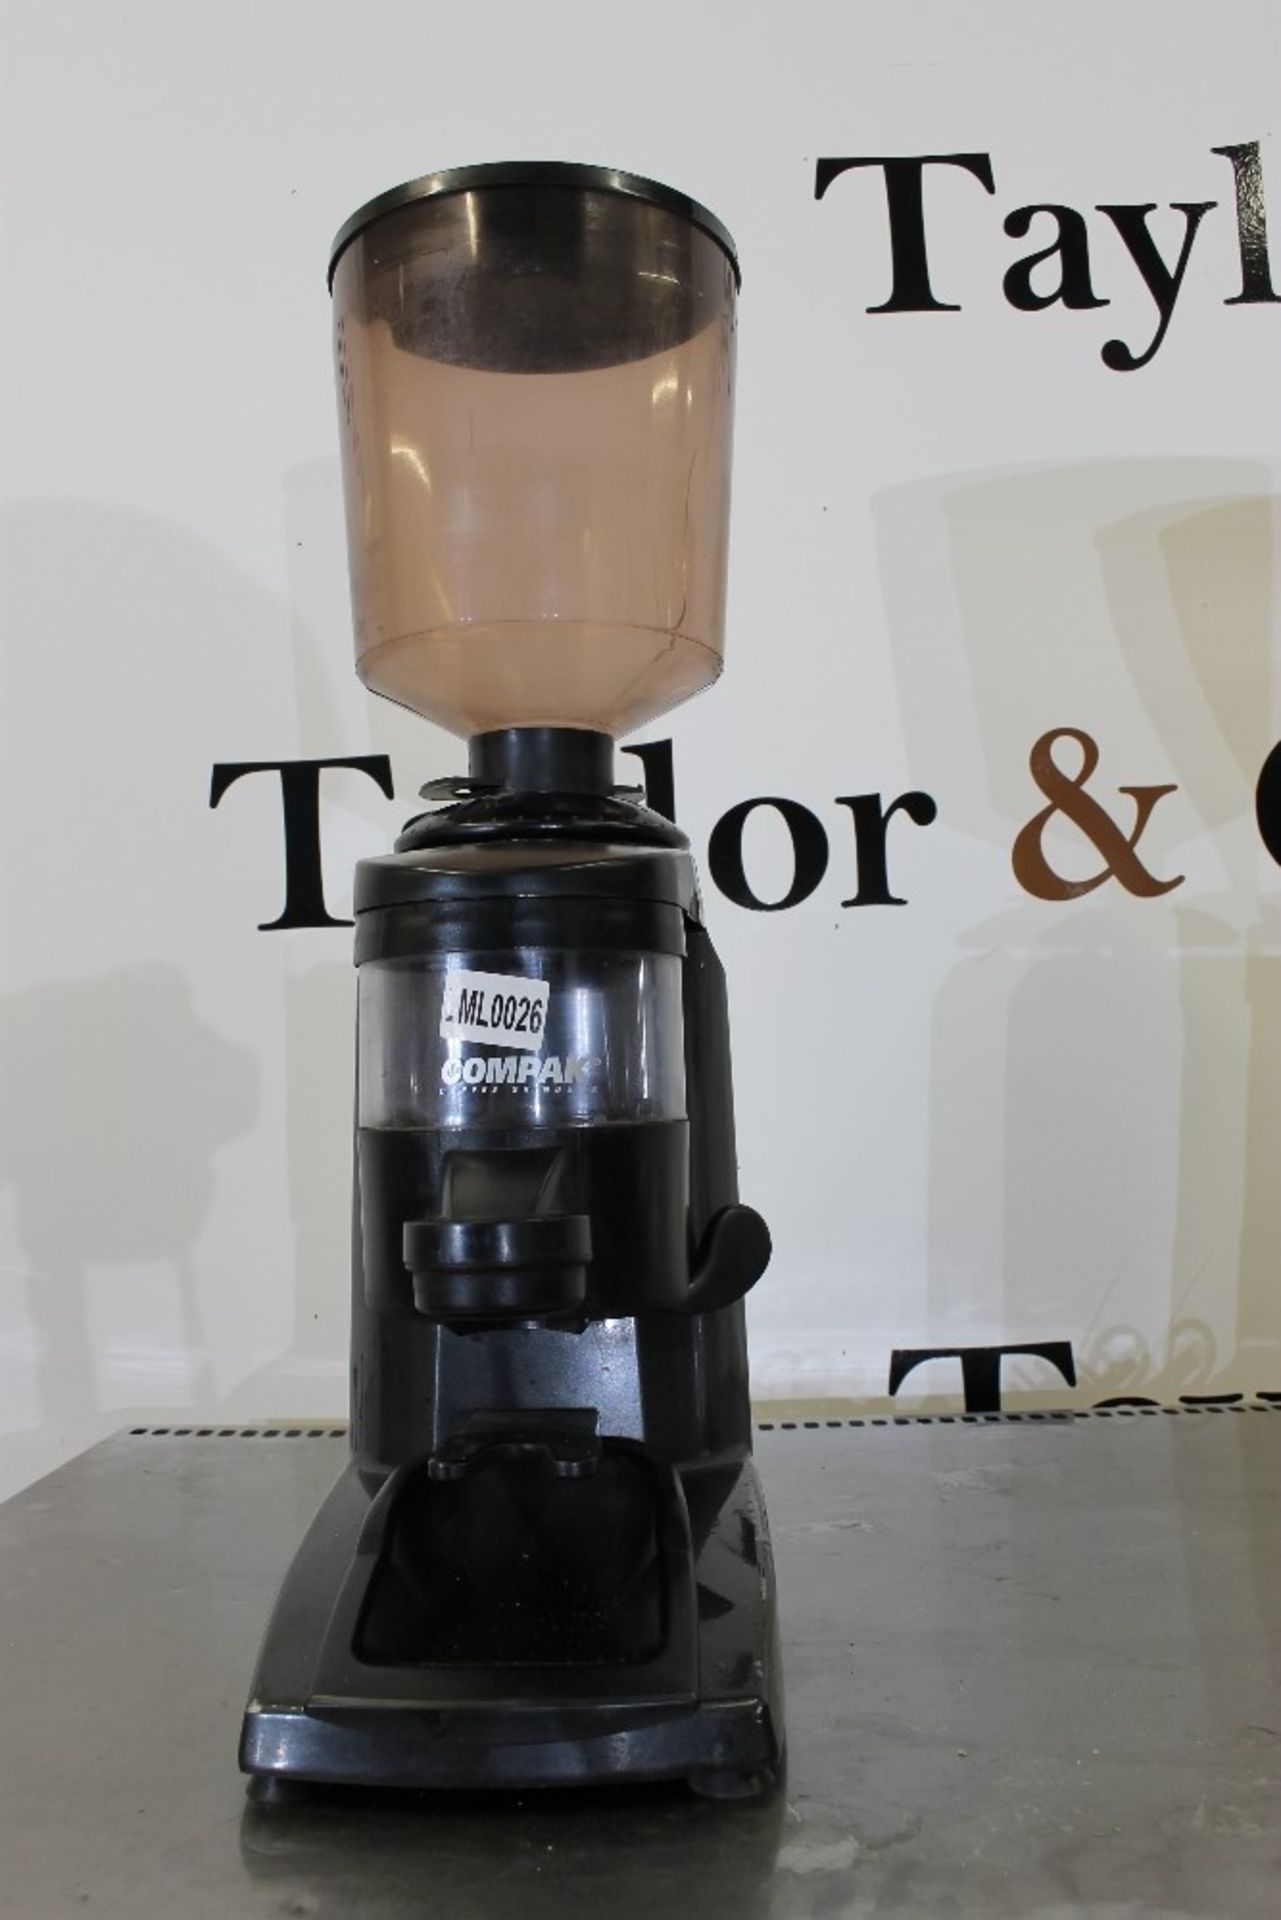 Compax Coffee Grinder – Cracked Glass